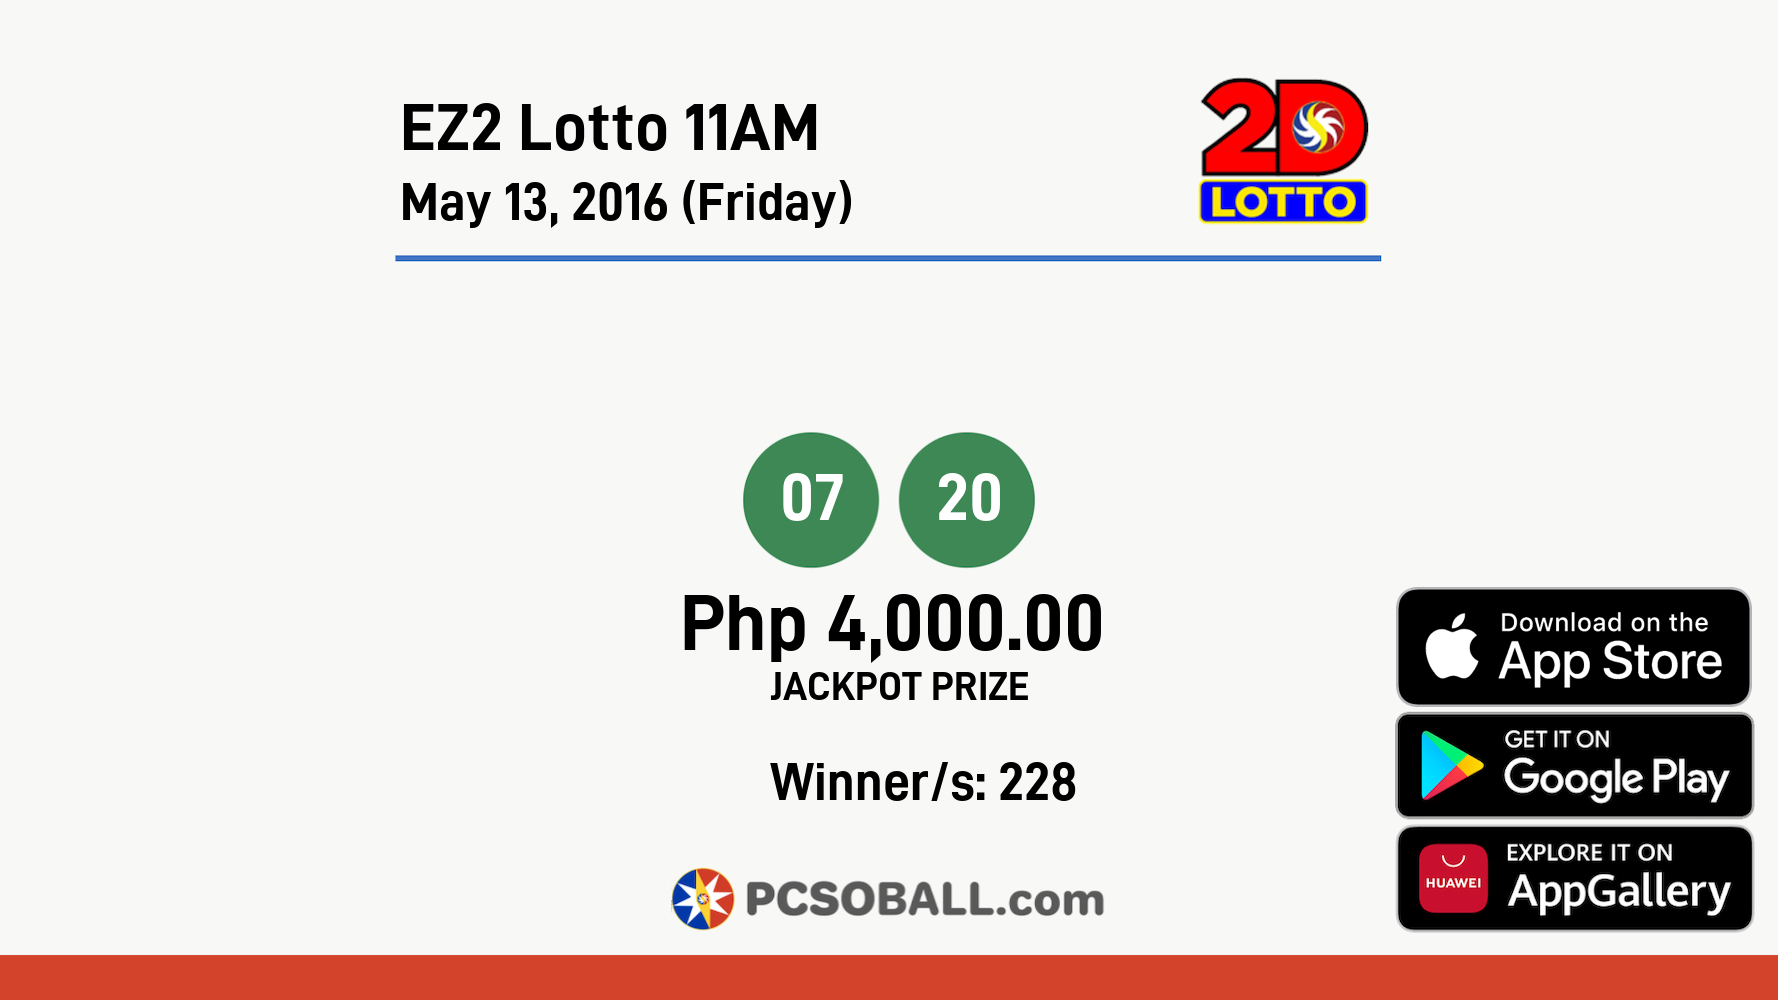 EZ2 Lotto 11AM May 13, 2016 (Friday) Result